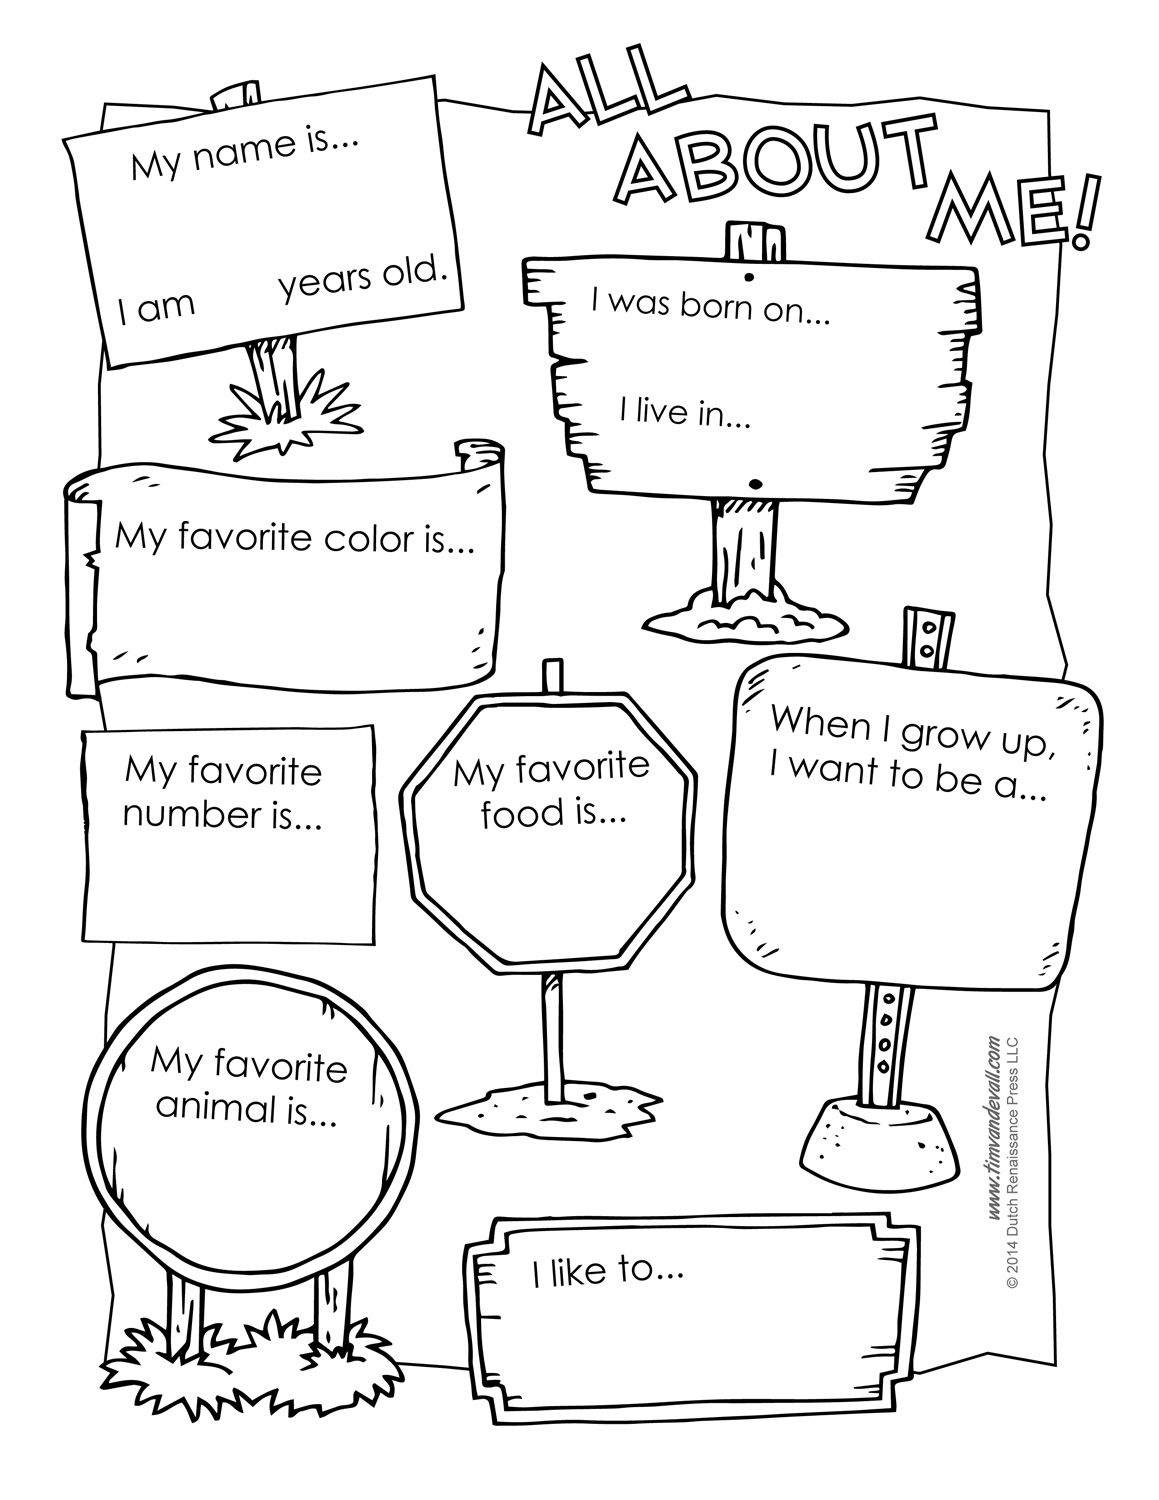 Best Printable All About Me Template_95124